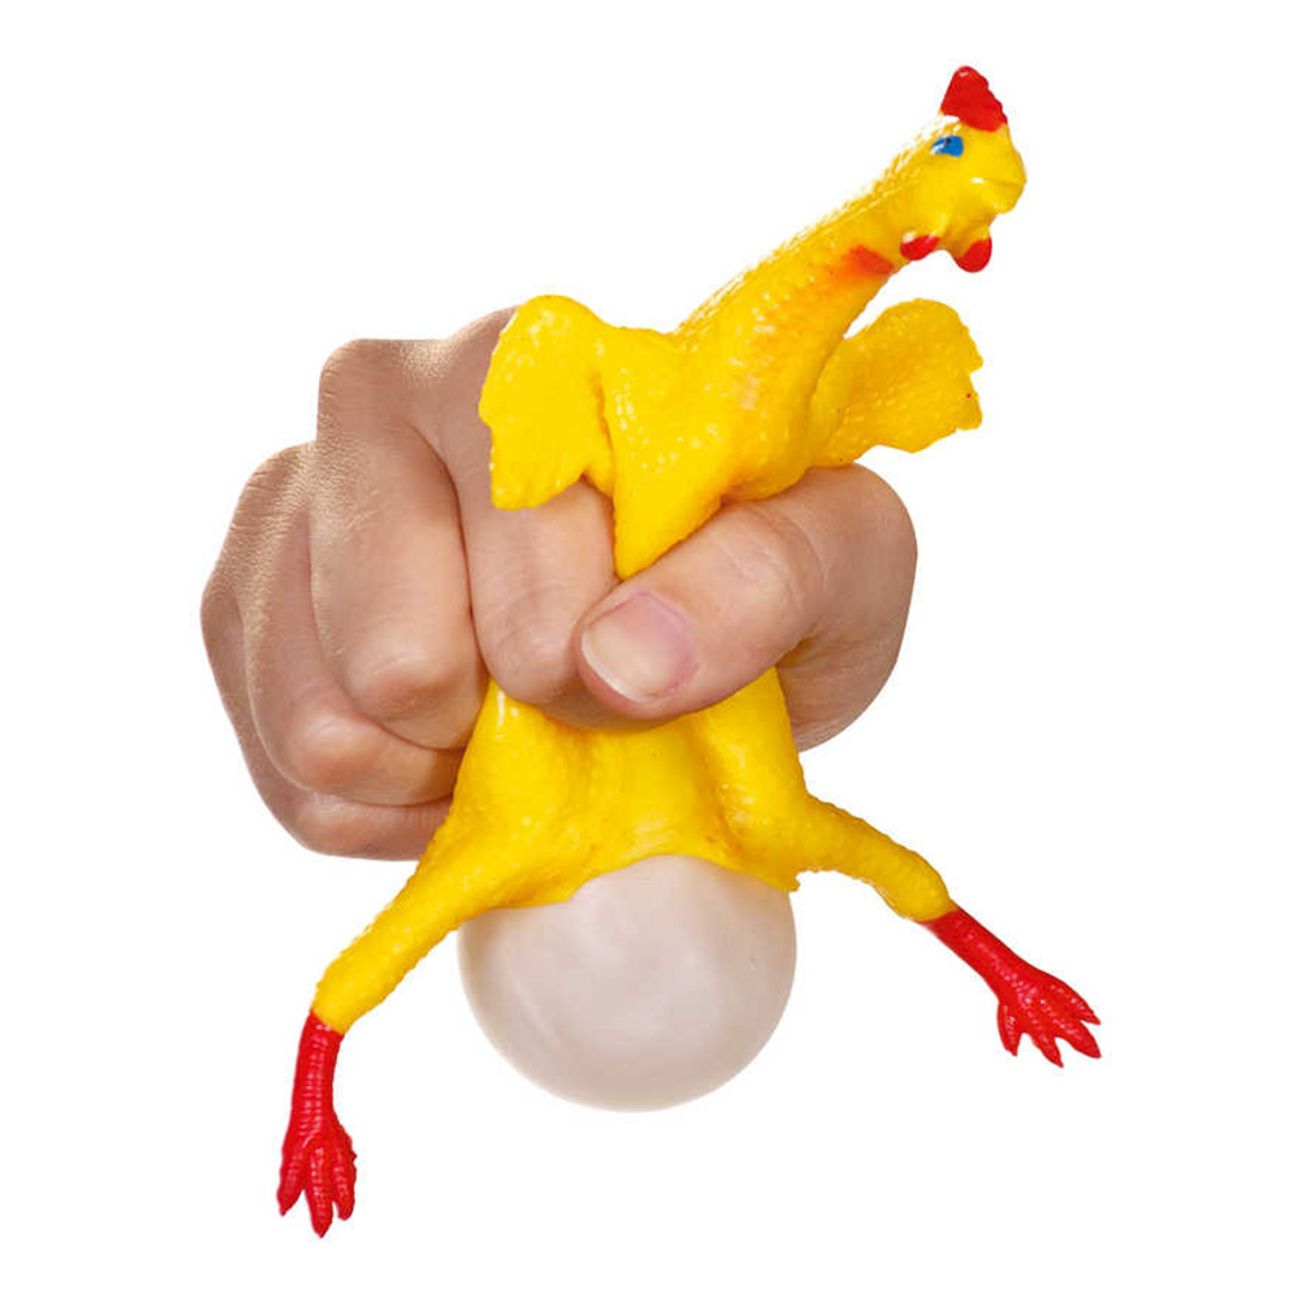 egg-laying-rubber-chicken-86019-1